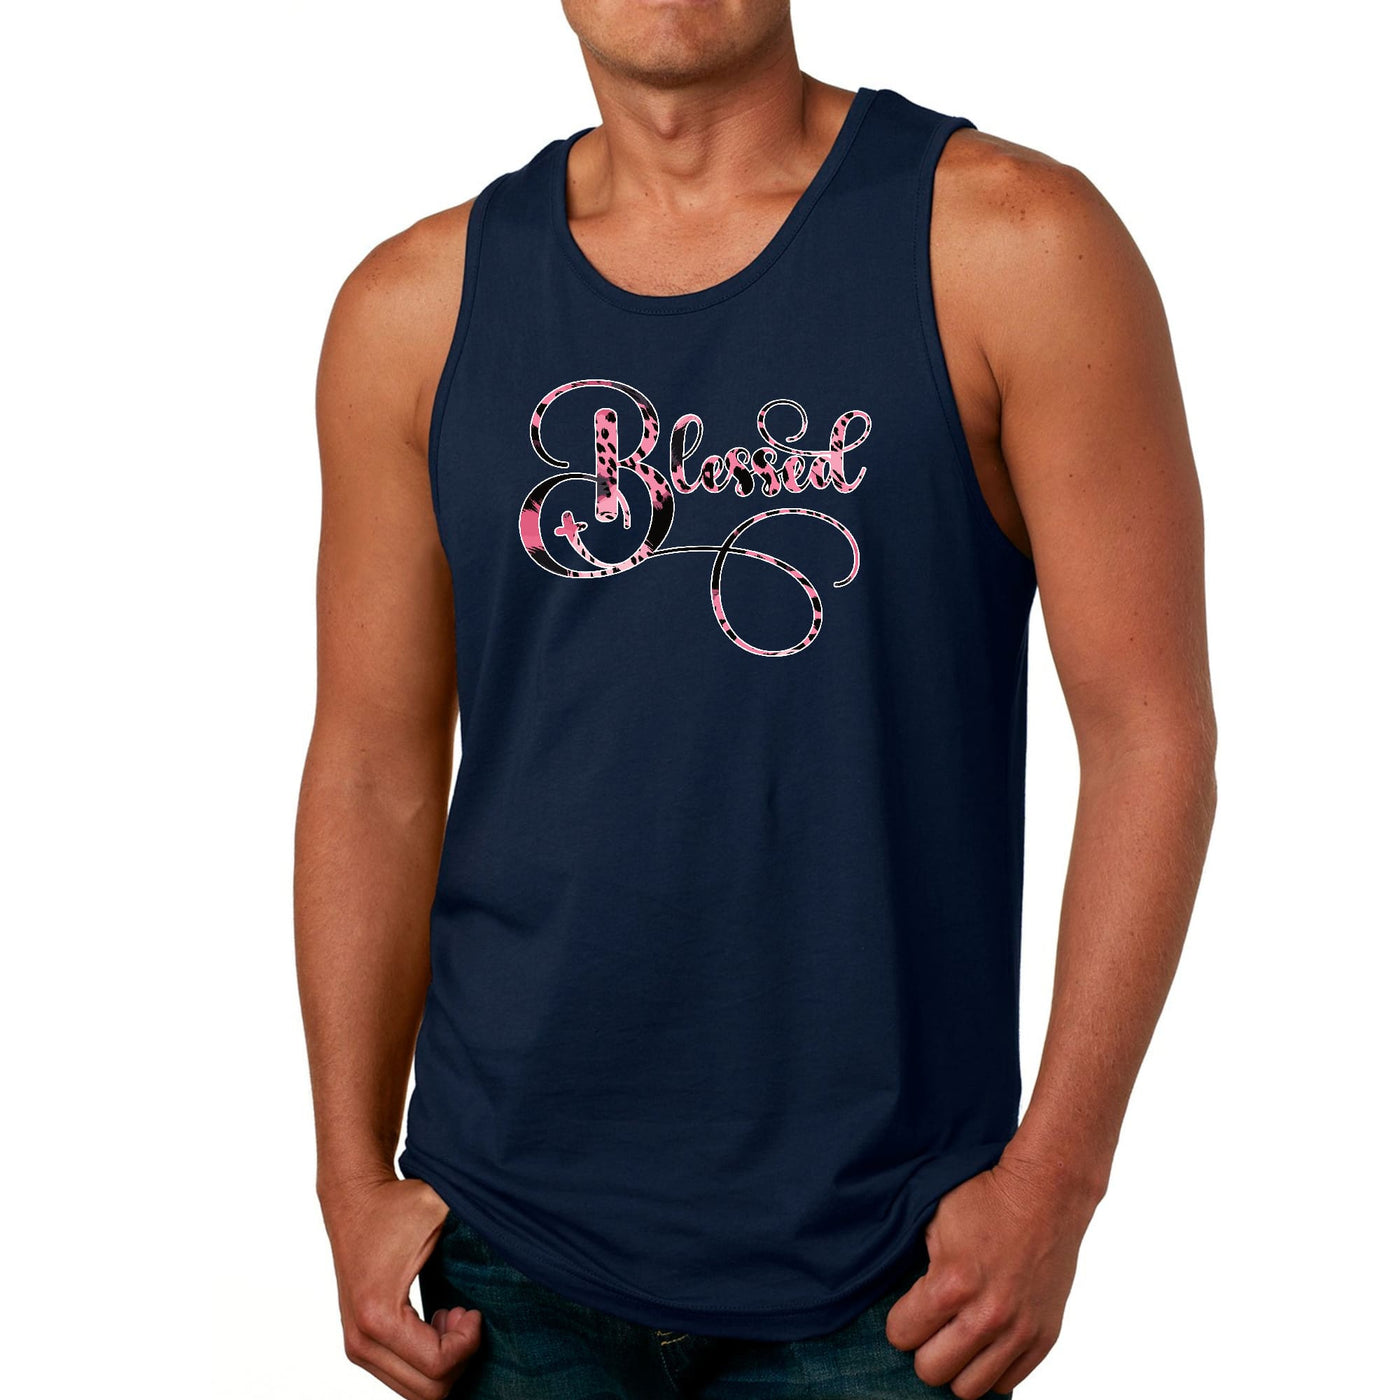 Mens Tank Top Fitness Shirt Blessed Pink And Black Patterned Graphic - Mens